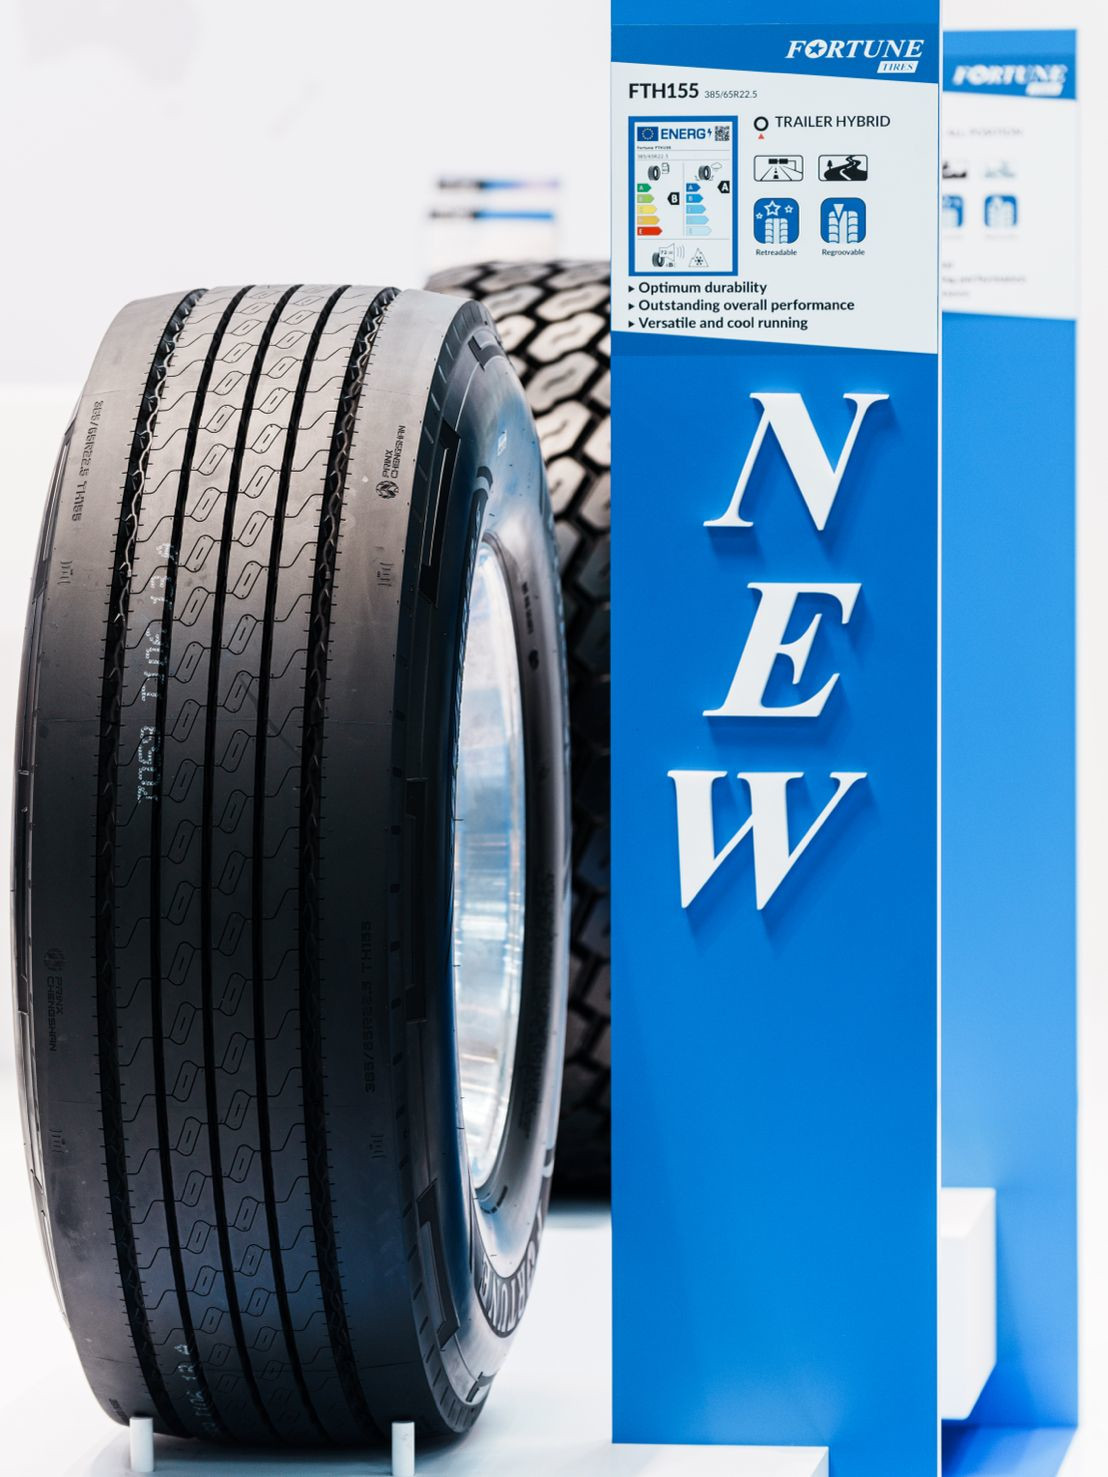 Prinx Chengshan launches A-rated truck tyre in Europe